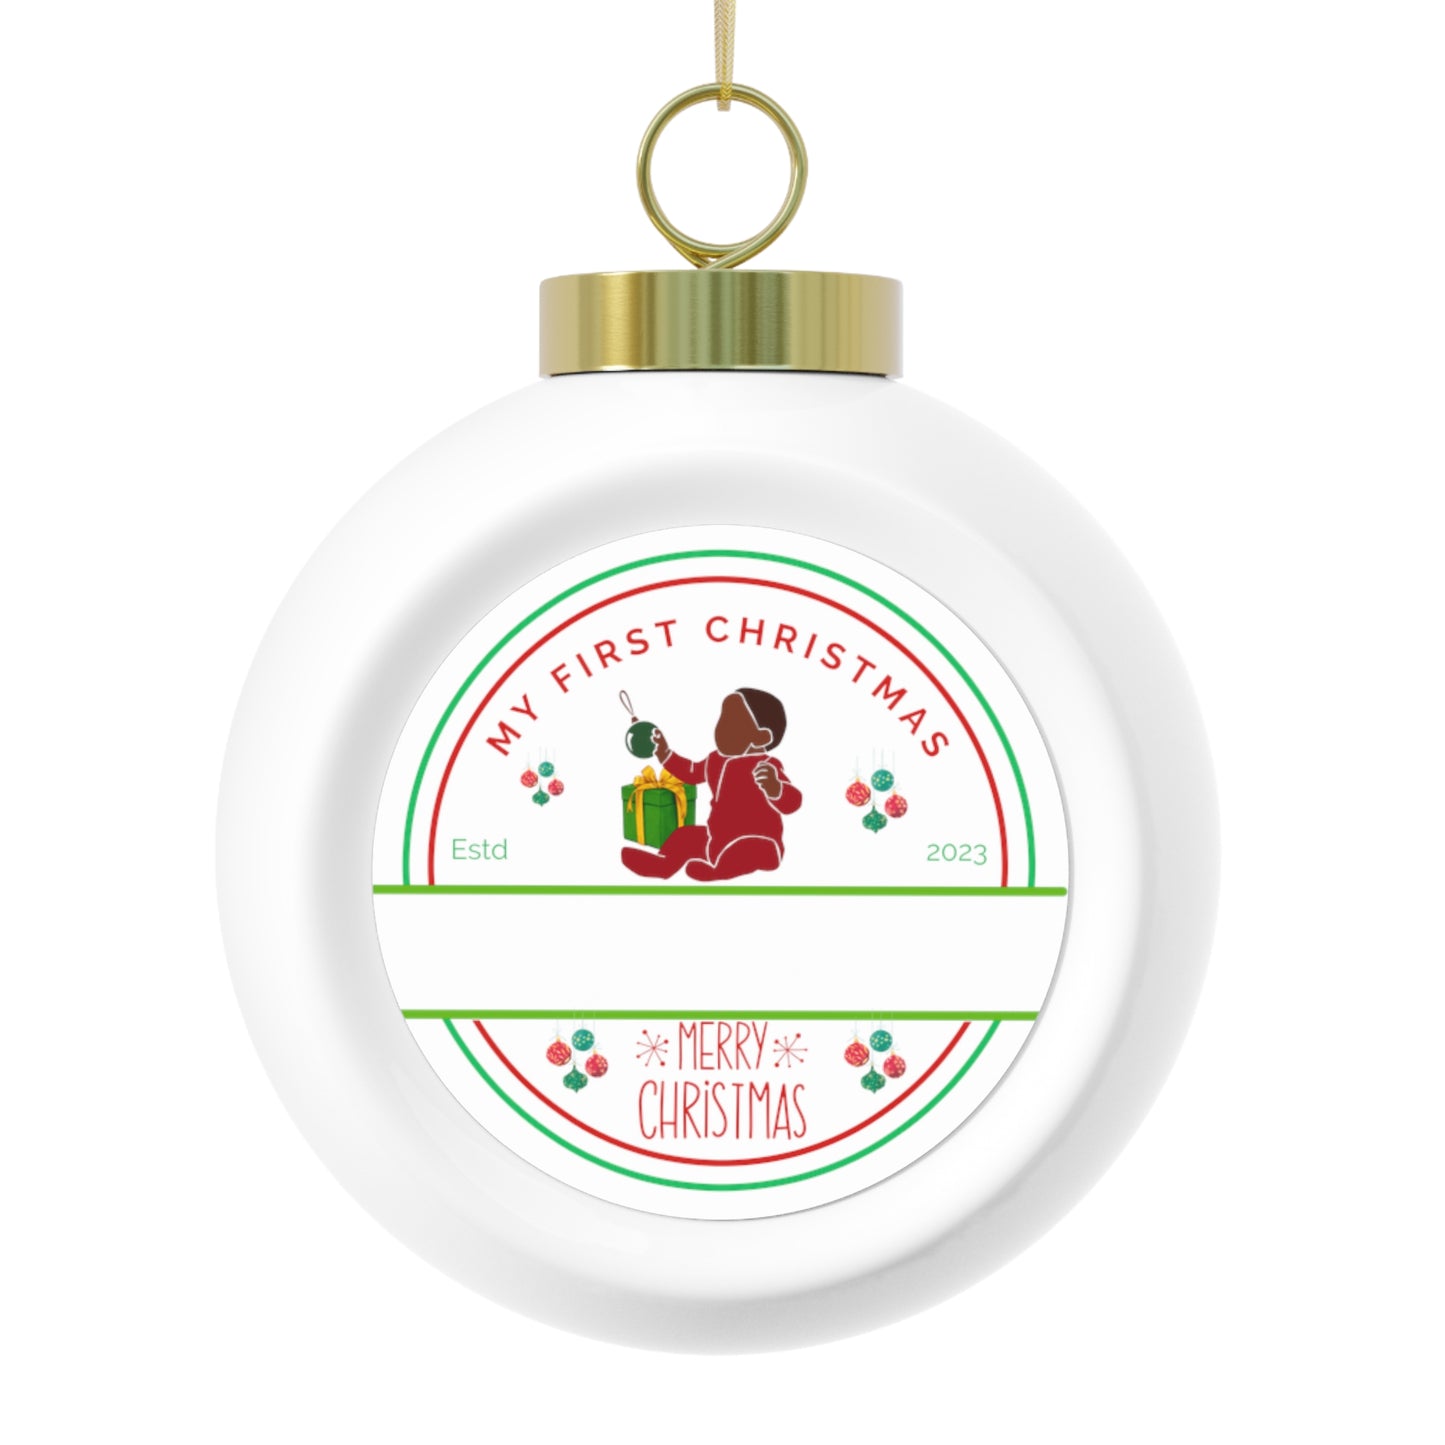 First Christmas Ball Ornament 1 (Personalized)